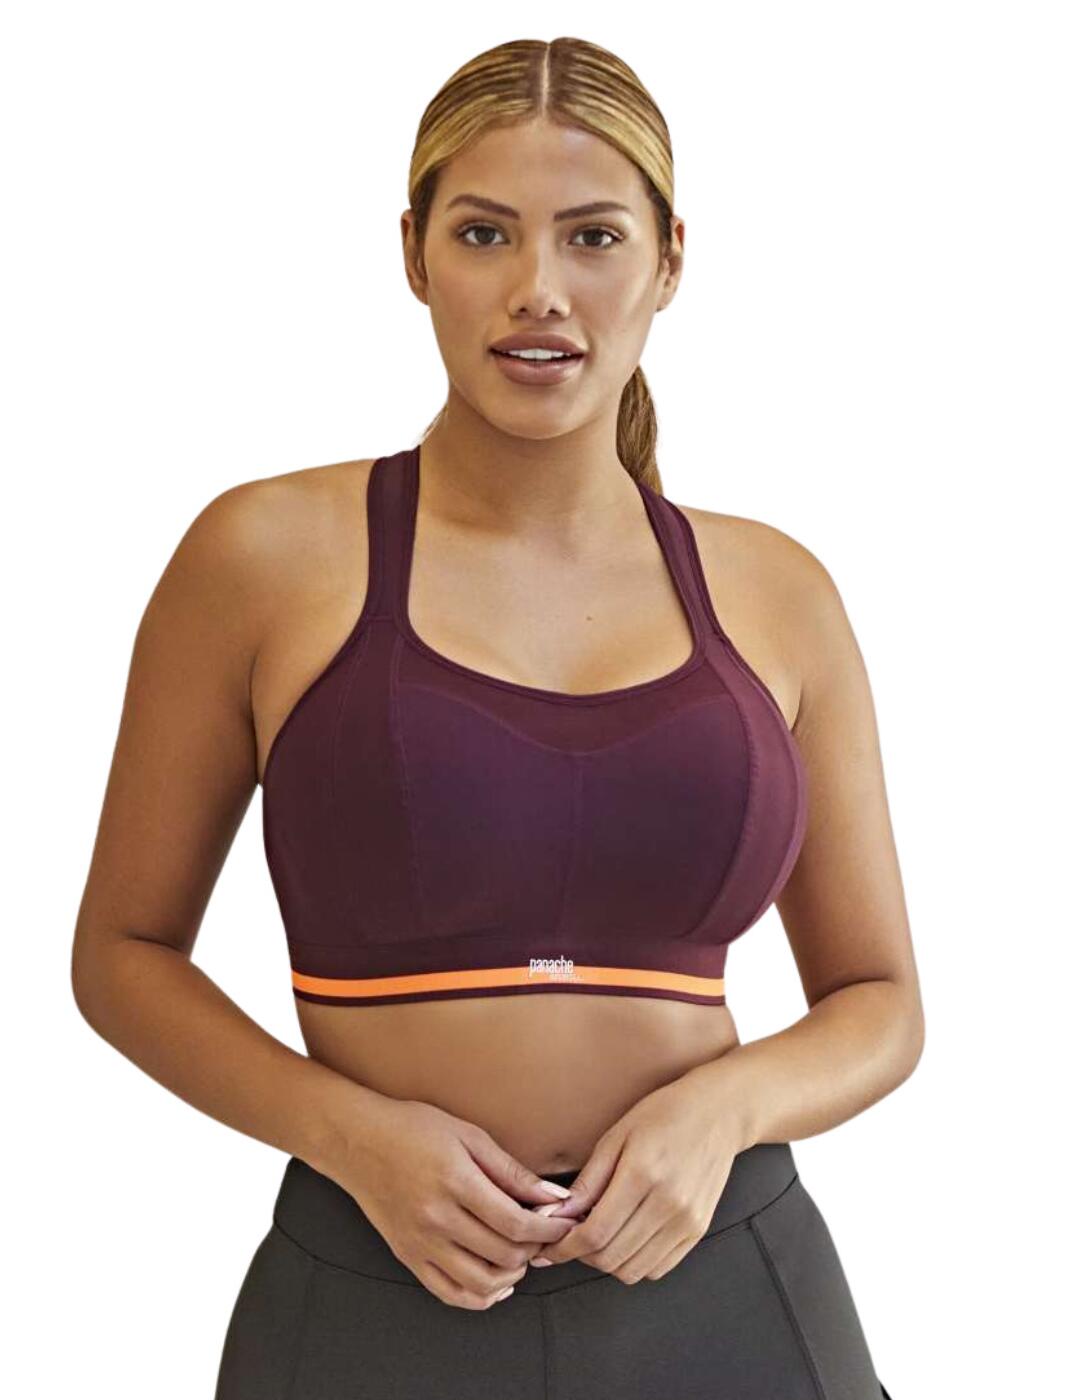 Buy Panache Sport Non Wired Sports Bra from the Next UK online shop